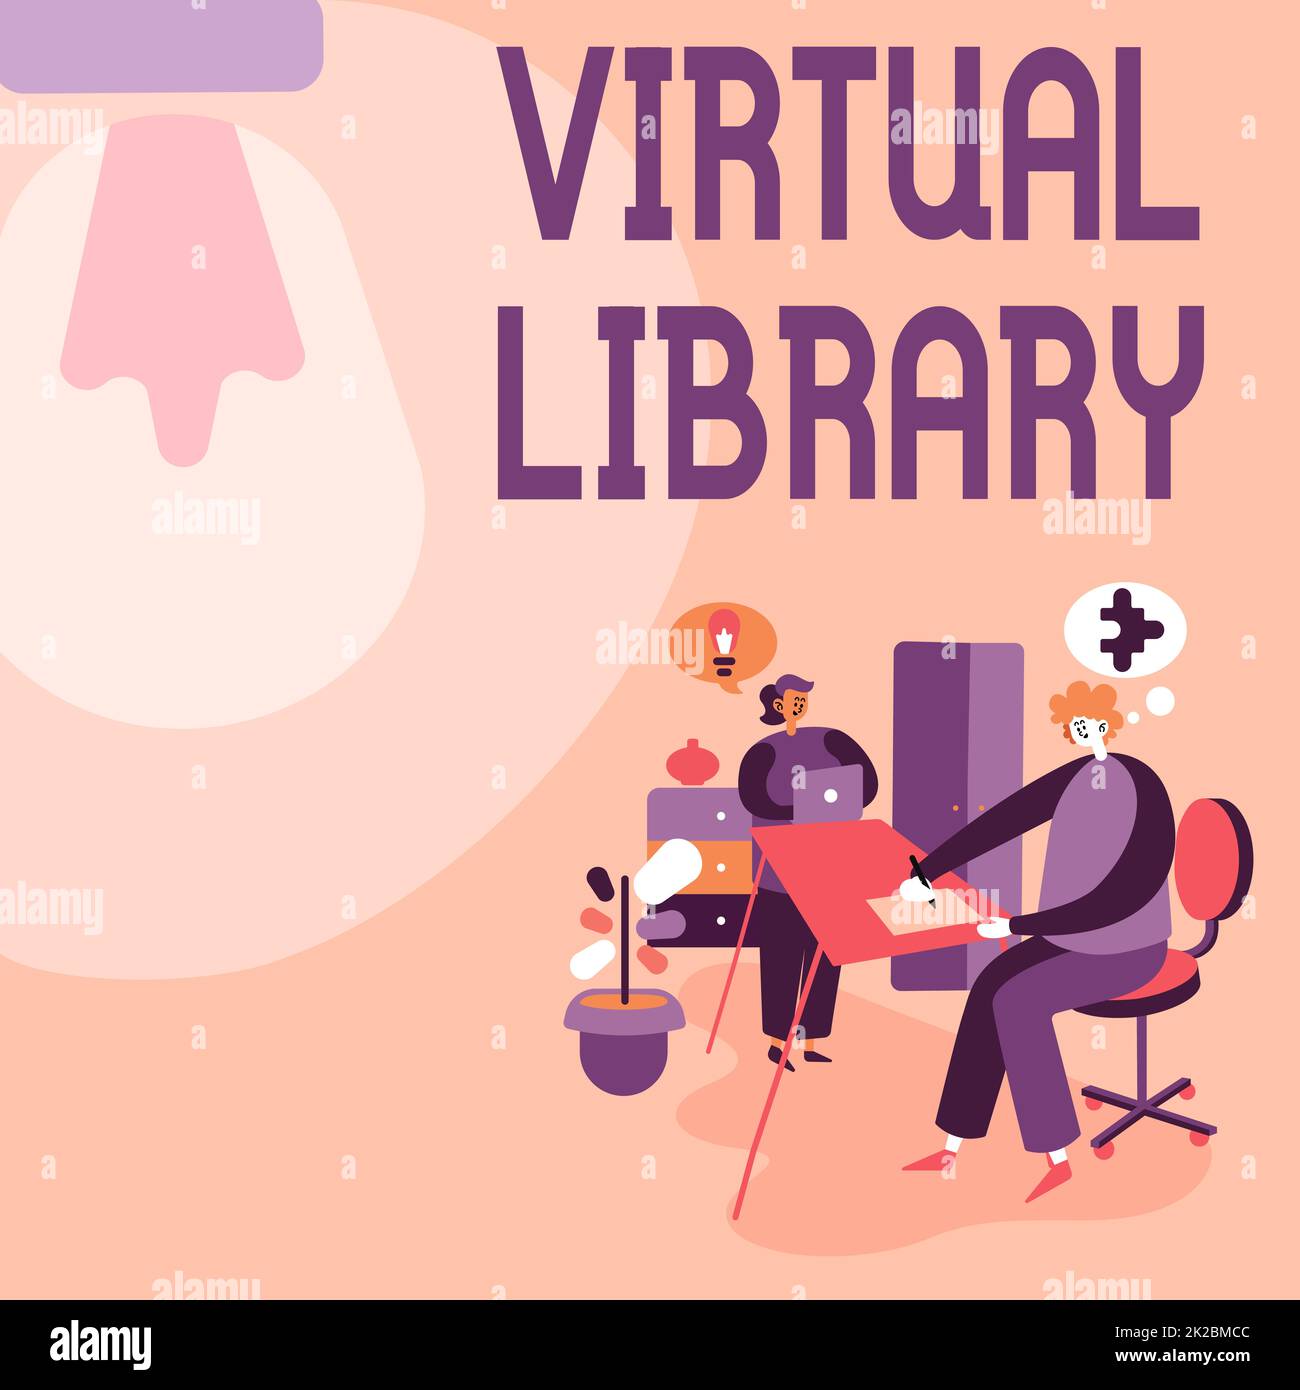 Sign displaying Virtual Library. Internet Concept Virtual Library Partners Sharing New Ideas For Skill Improvement Work Strategies. Stock Photo